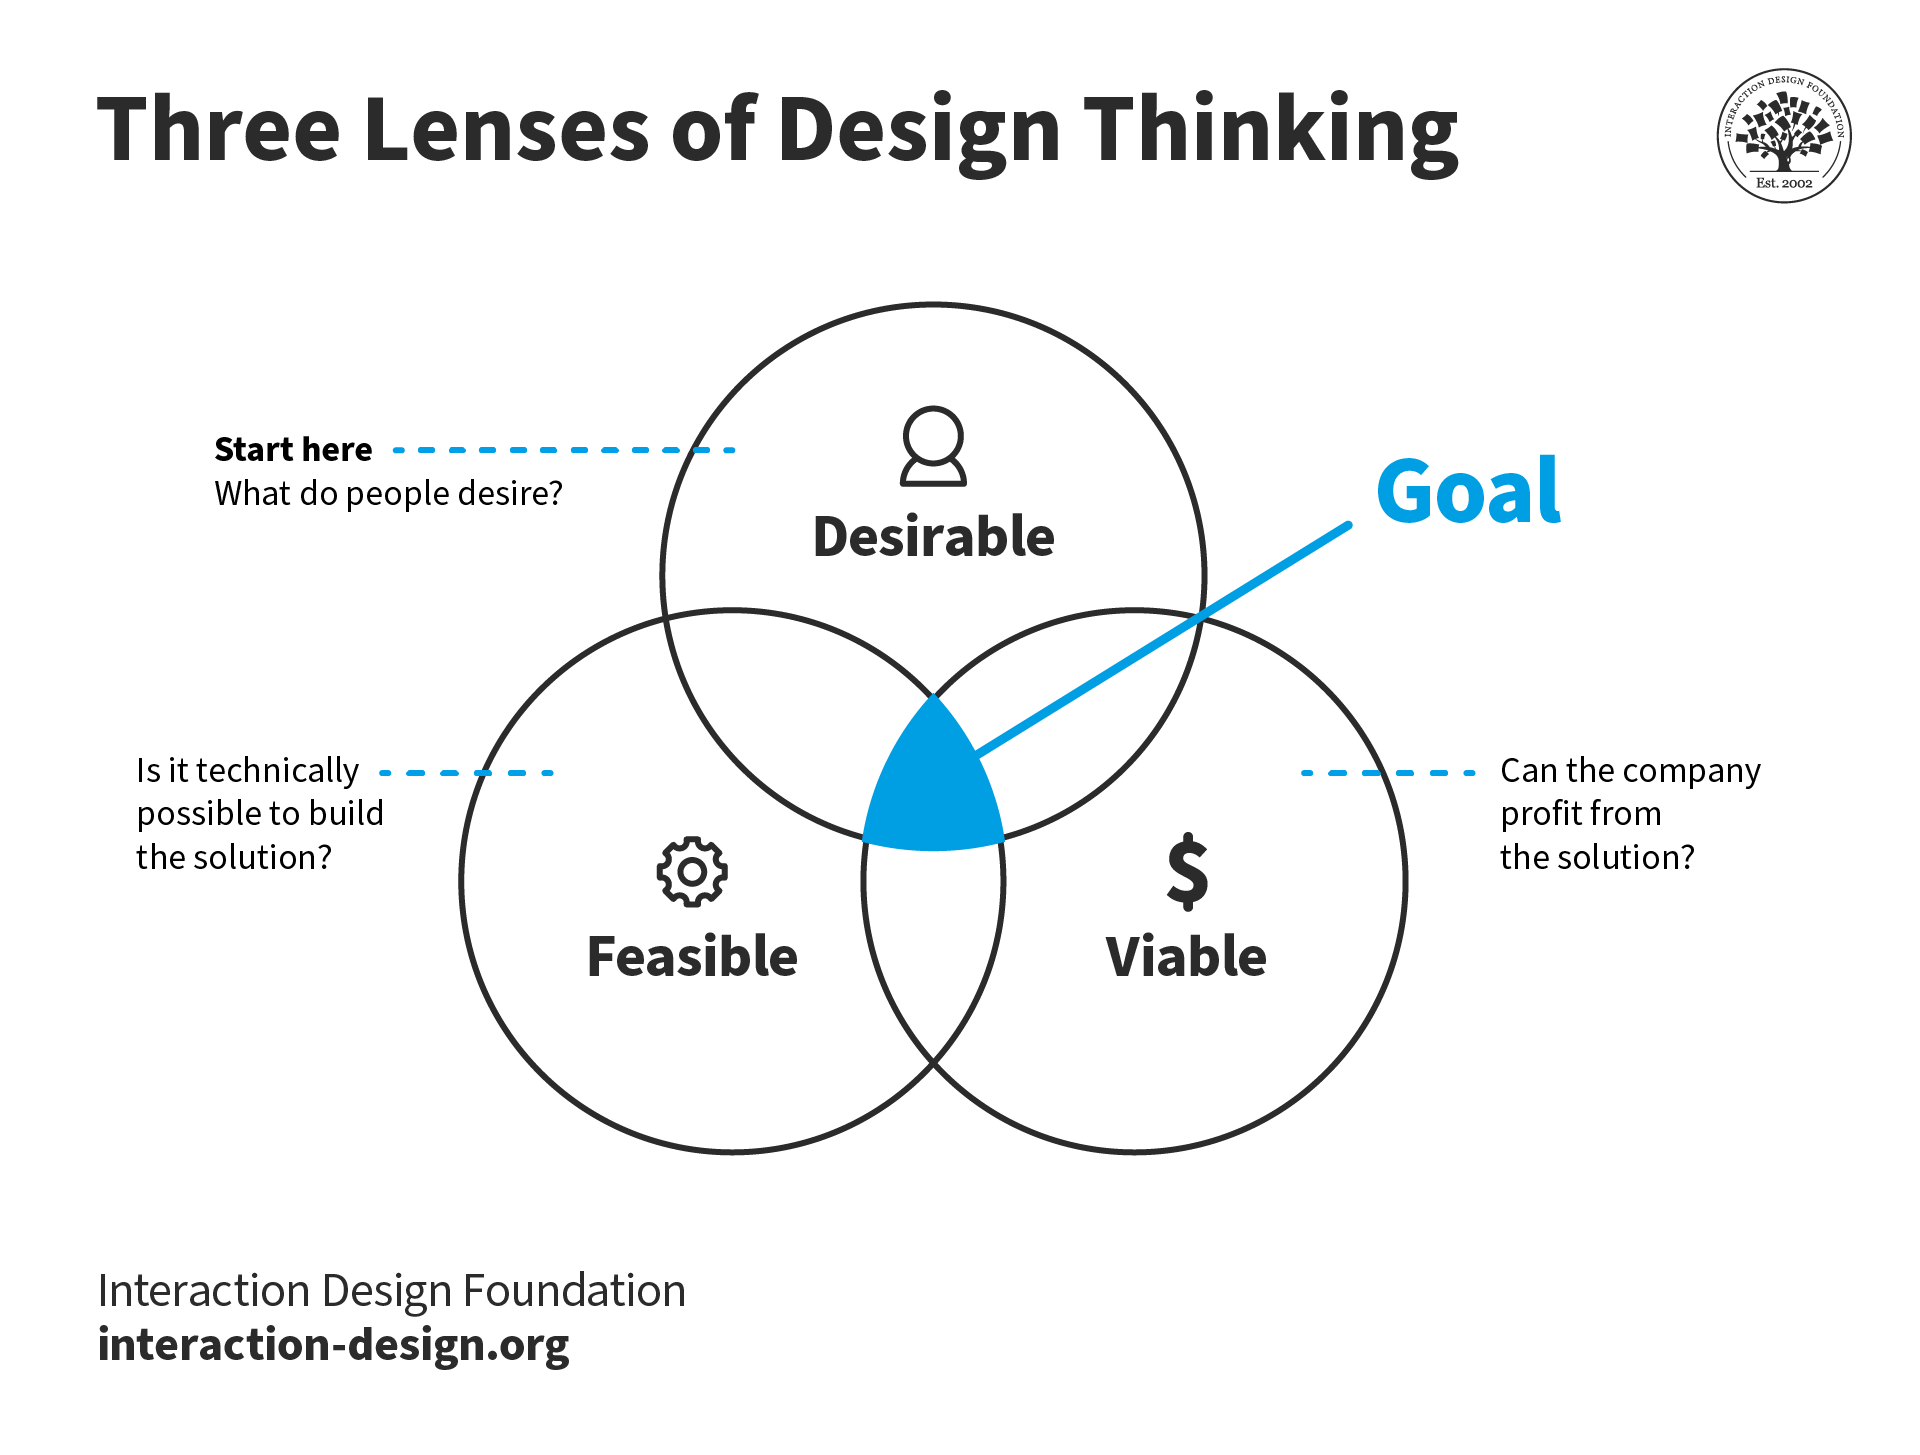 https://public-images.interaction-design.org/tags/td-three-lenses-of-design-thinking.png